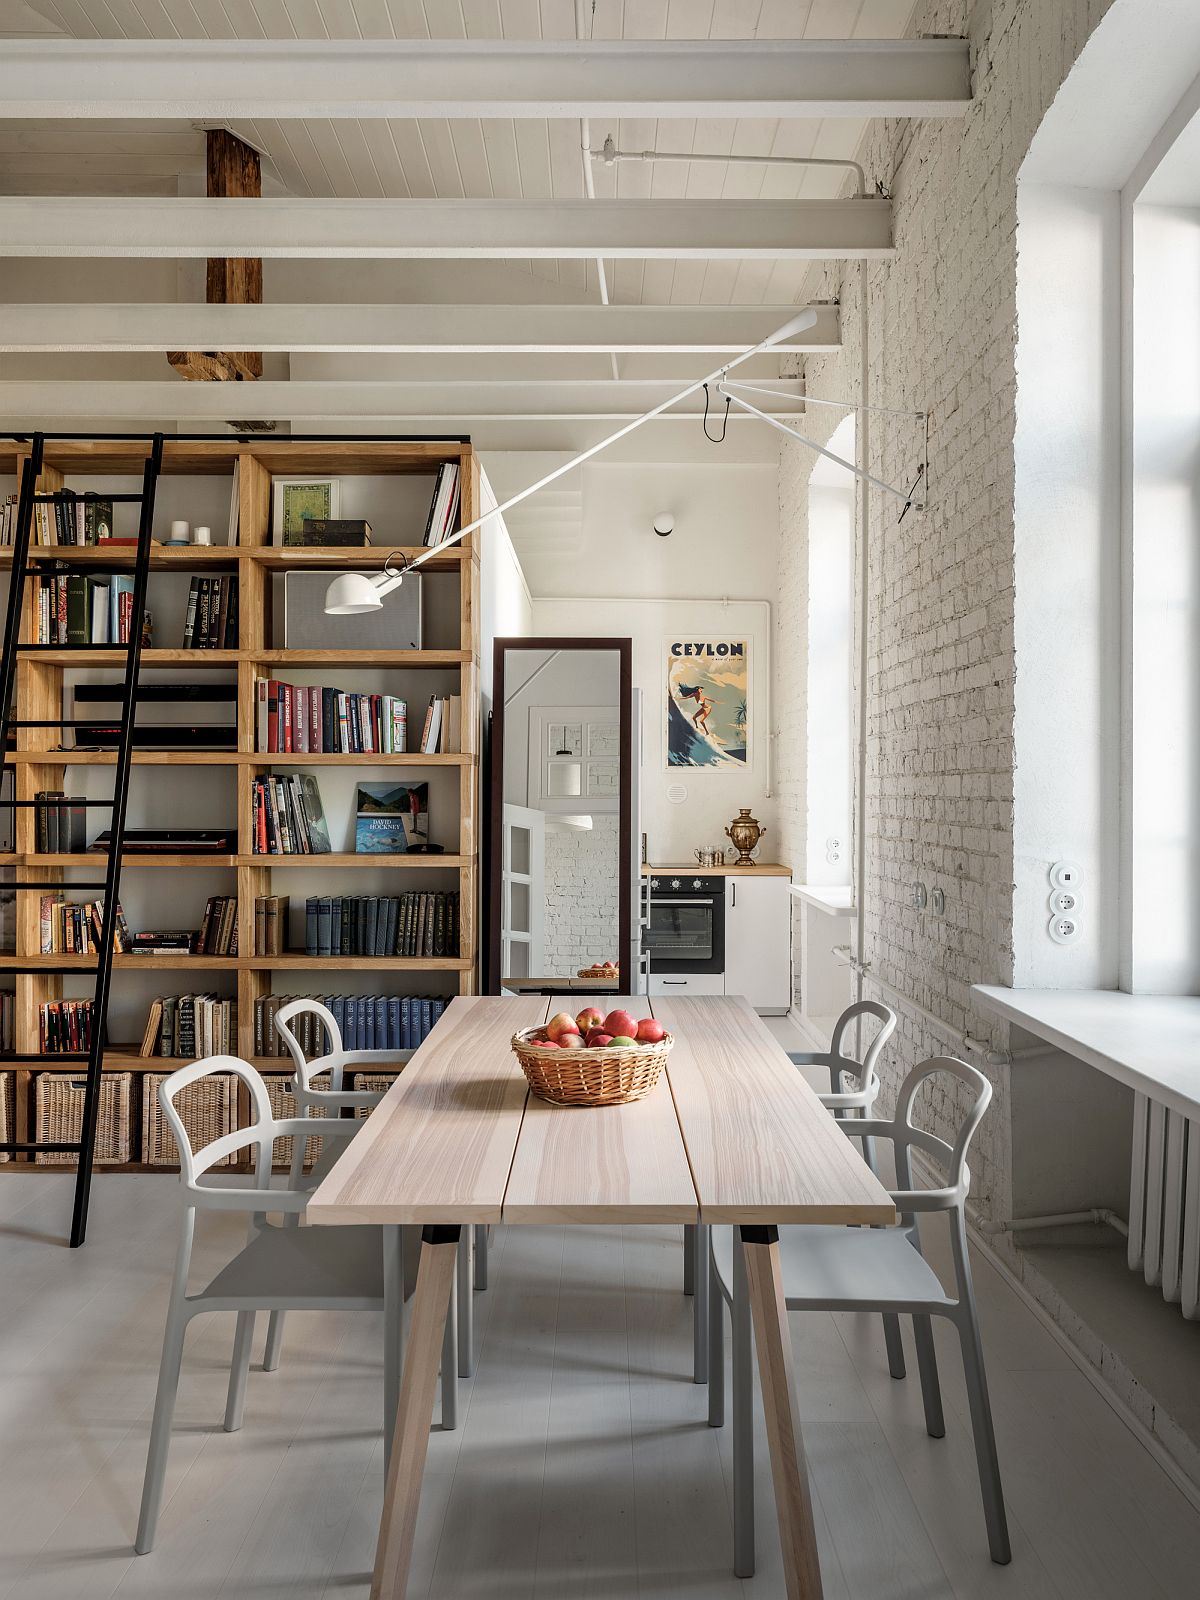 Open-living-area-dining-and-kitchen-of-the-apartment-with-a-library-that-extends-into-mezzanine-level-21413